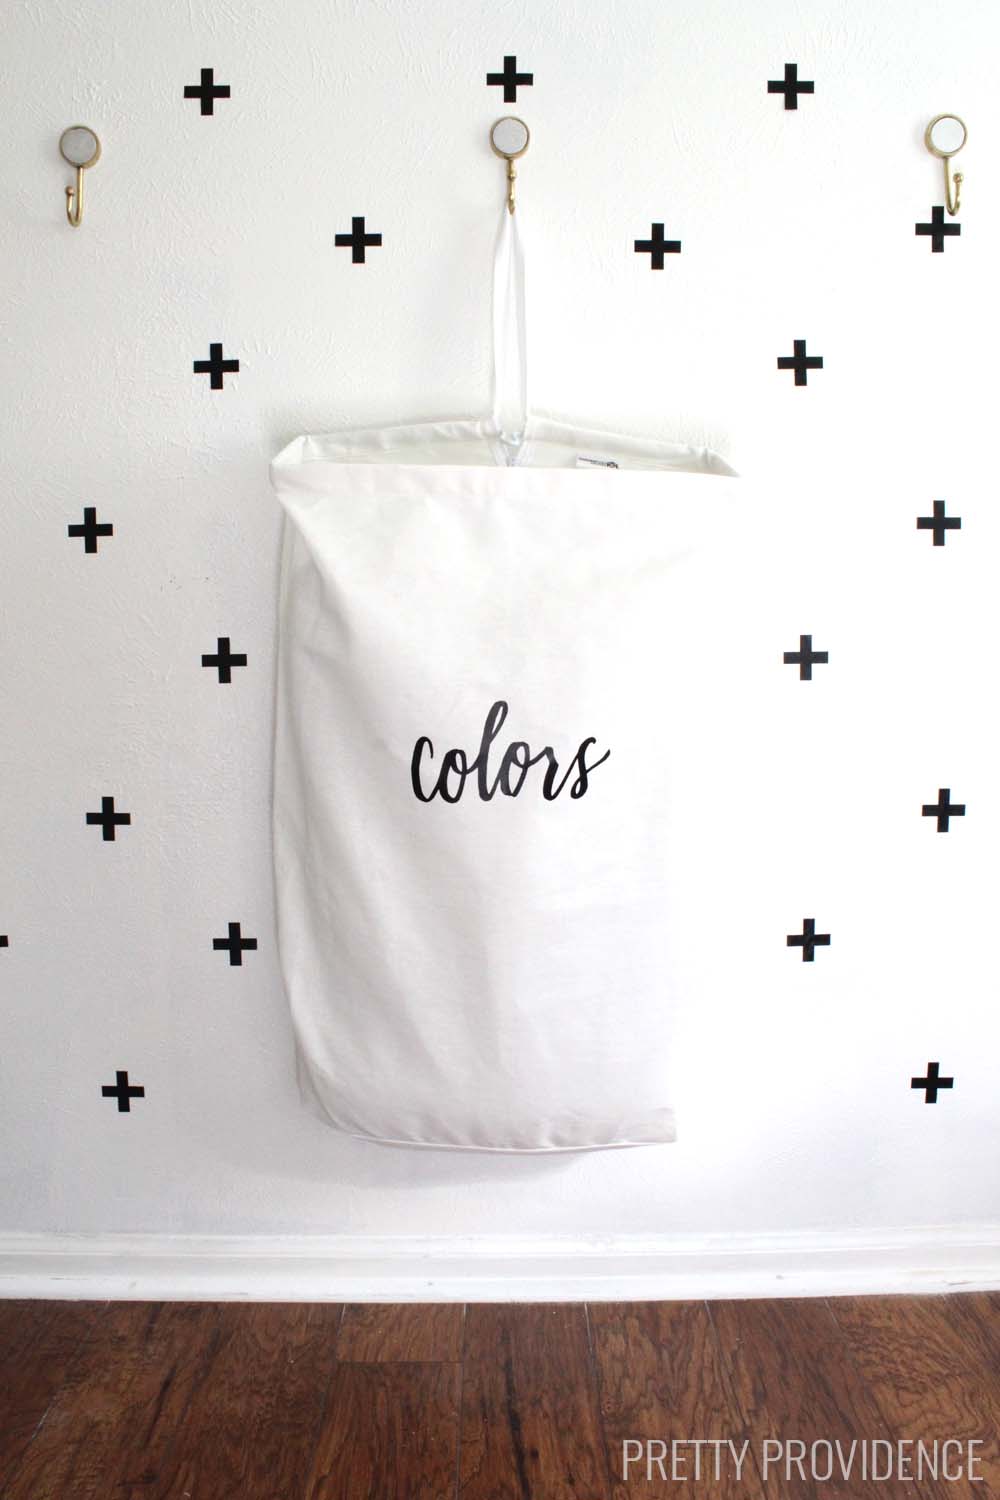 I love this space-saving laundry organization idea! The bag labels are so pretty too!